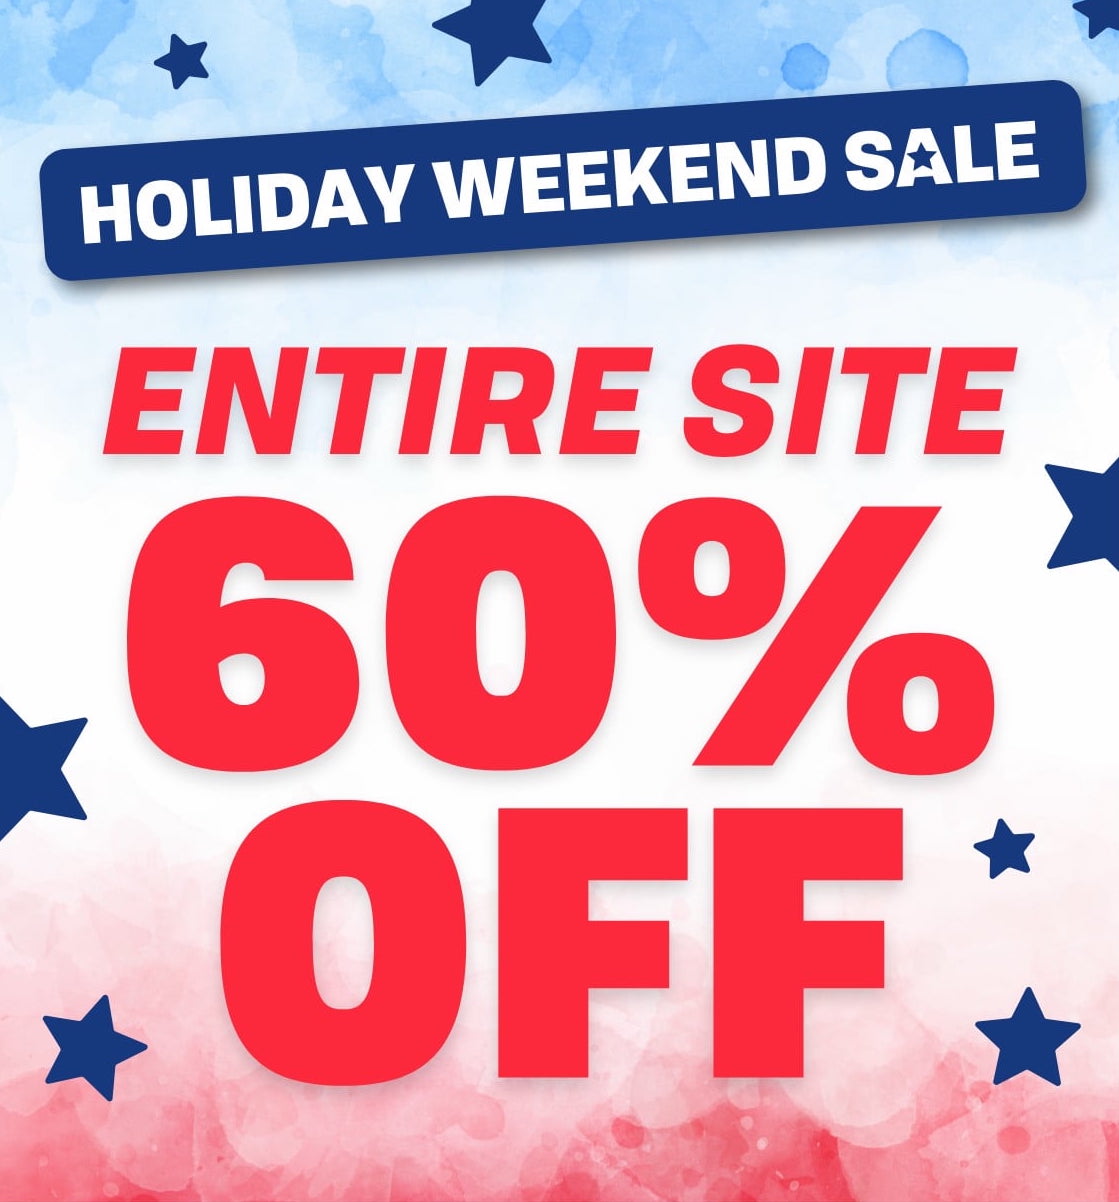 HOLIDAY WEEKEND SALE ENTIRE SITE 60% OFF | 